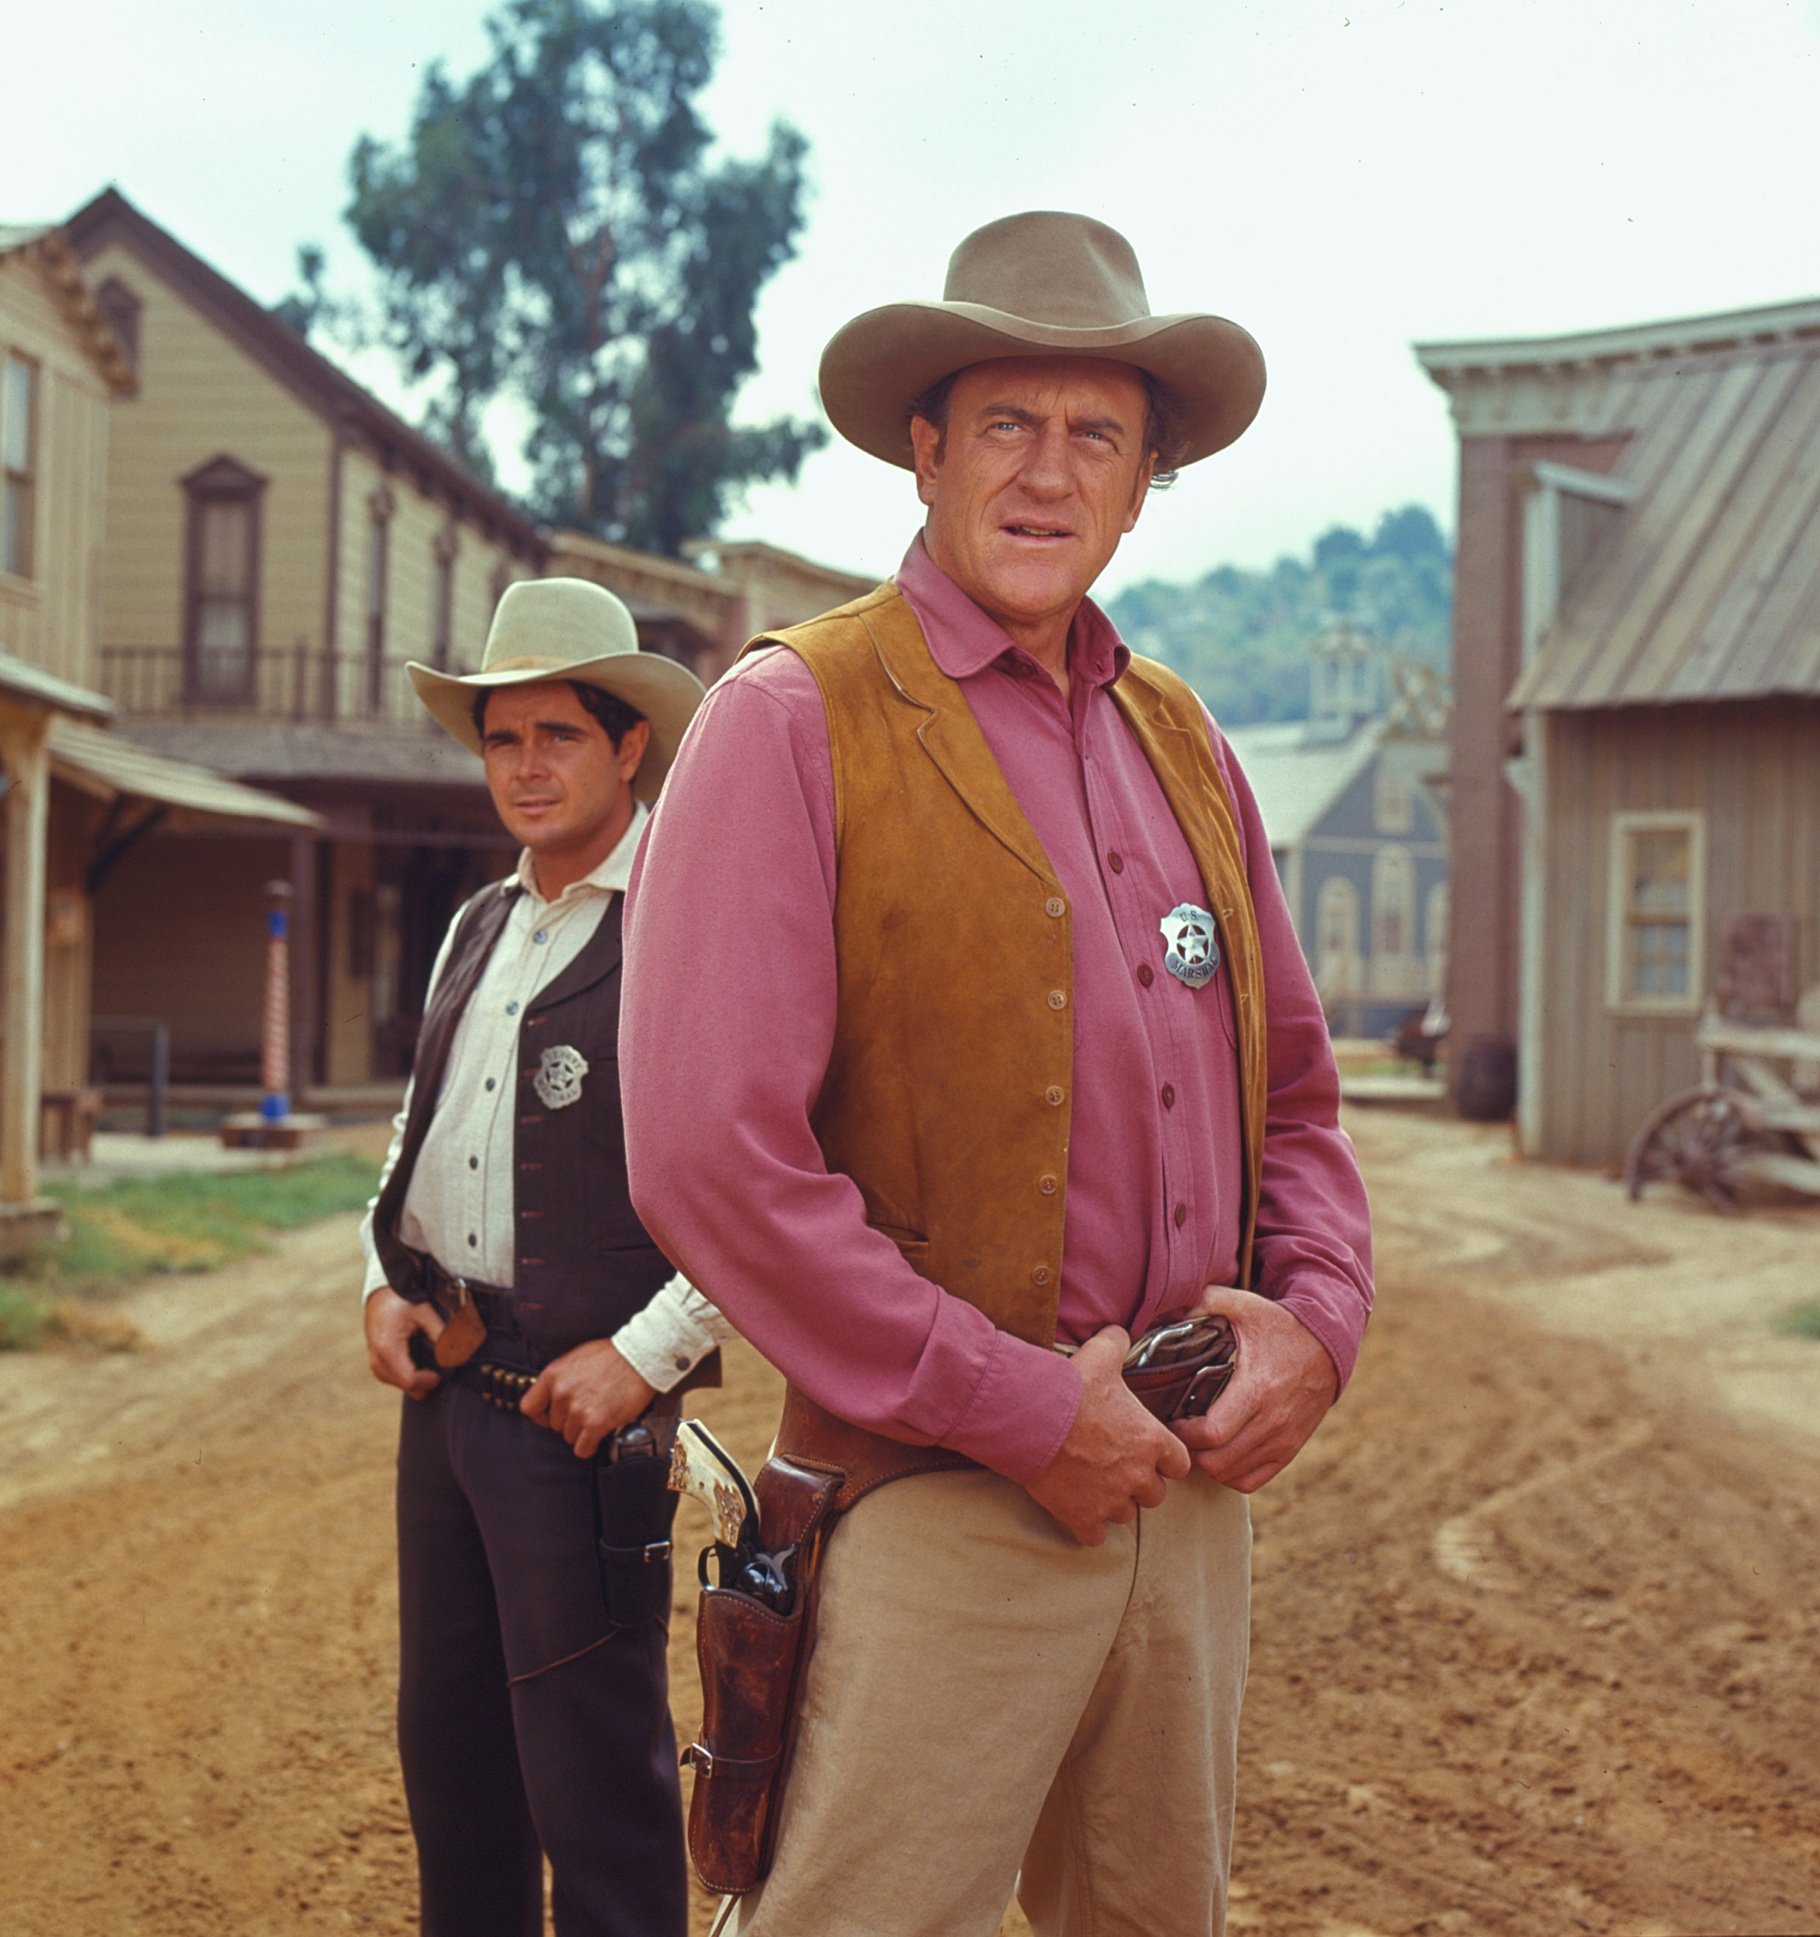 Promotional portrait of American actors James Arness (as U. S. Marshal Matt Dillon0 (foreground) and Buck Taylor (as Newly O'Brien) from the television series 'Gunsmoke,' 1970.| Source: Getty Images